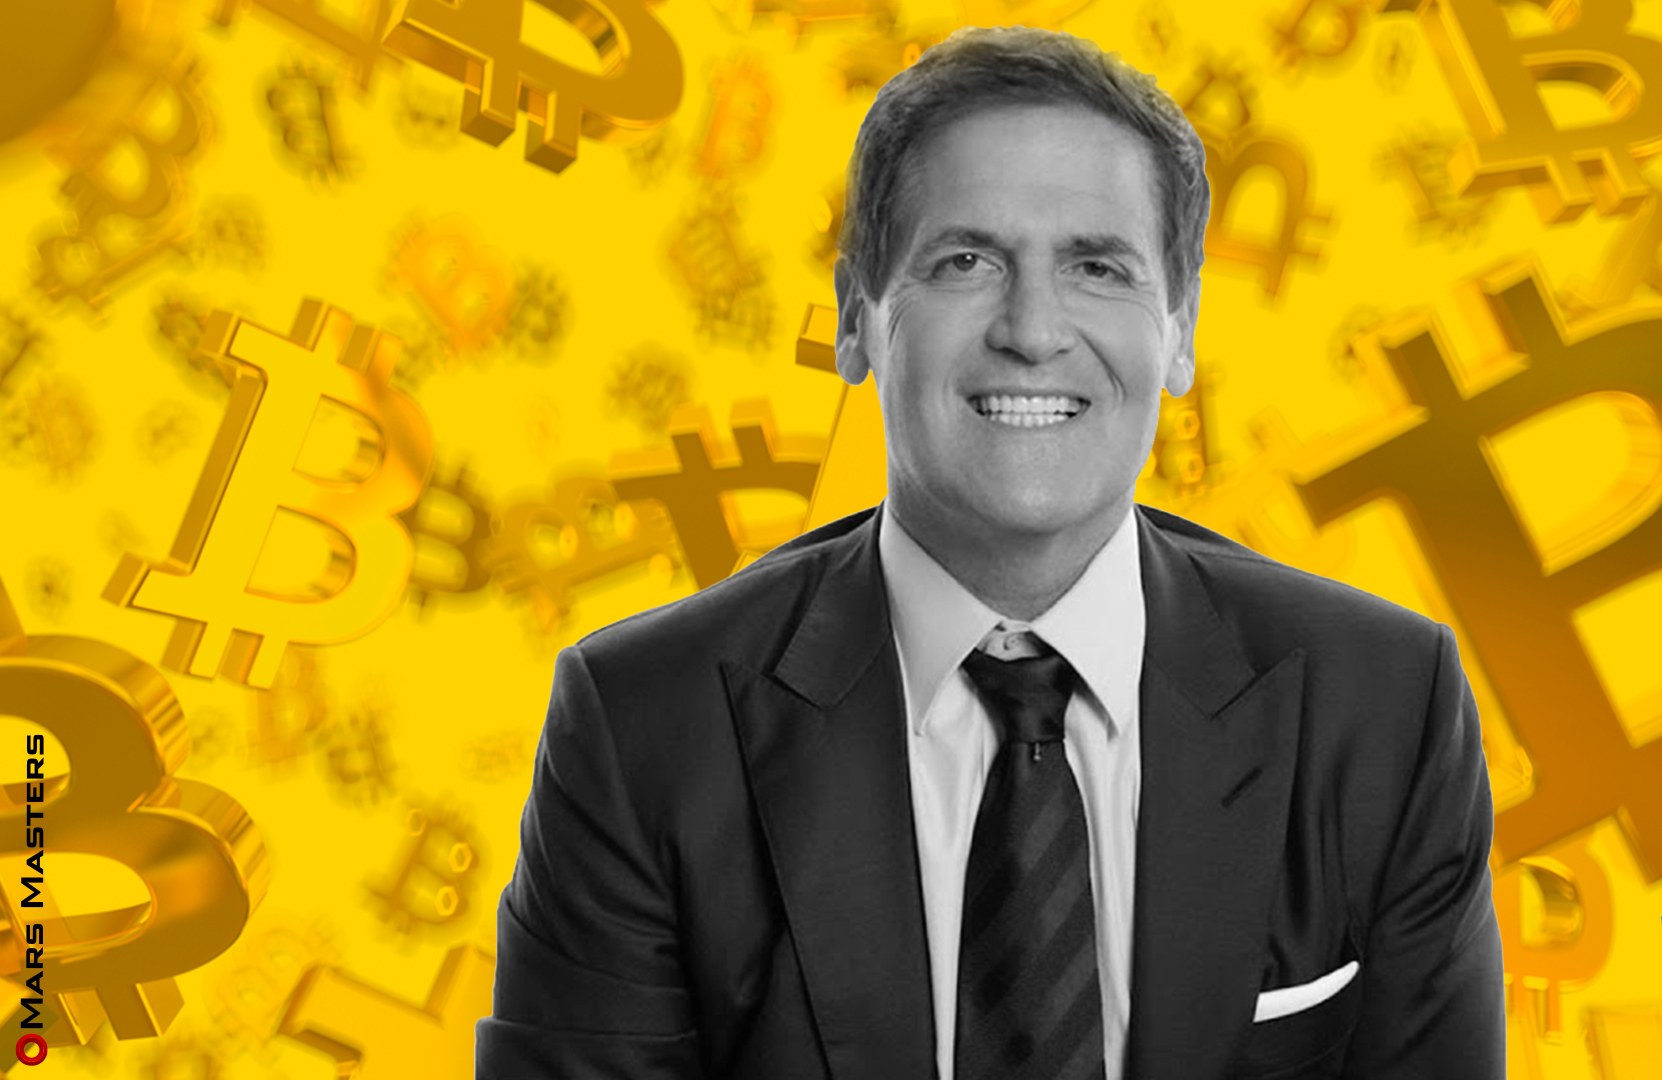 Mark Cuban claims he would rather own bananas over Bitcoin